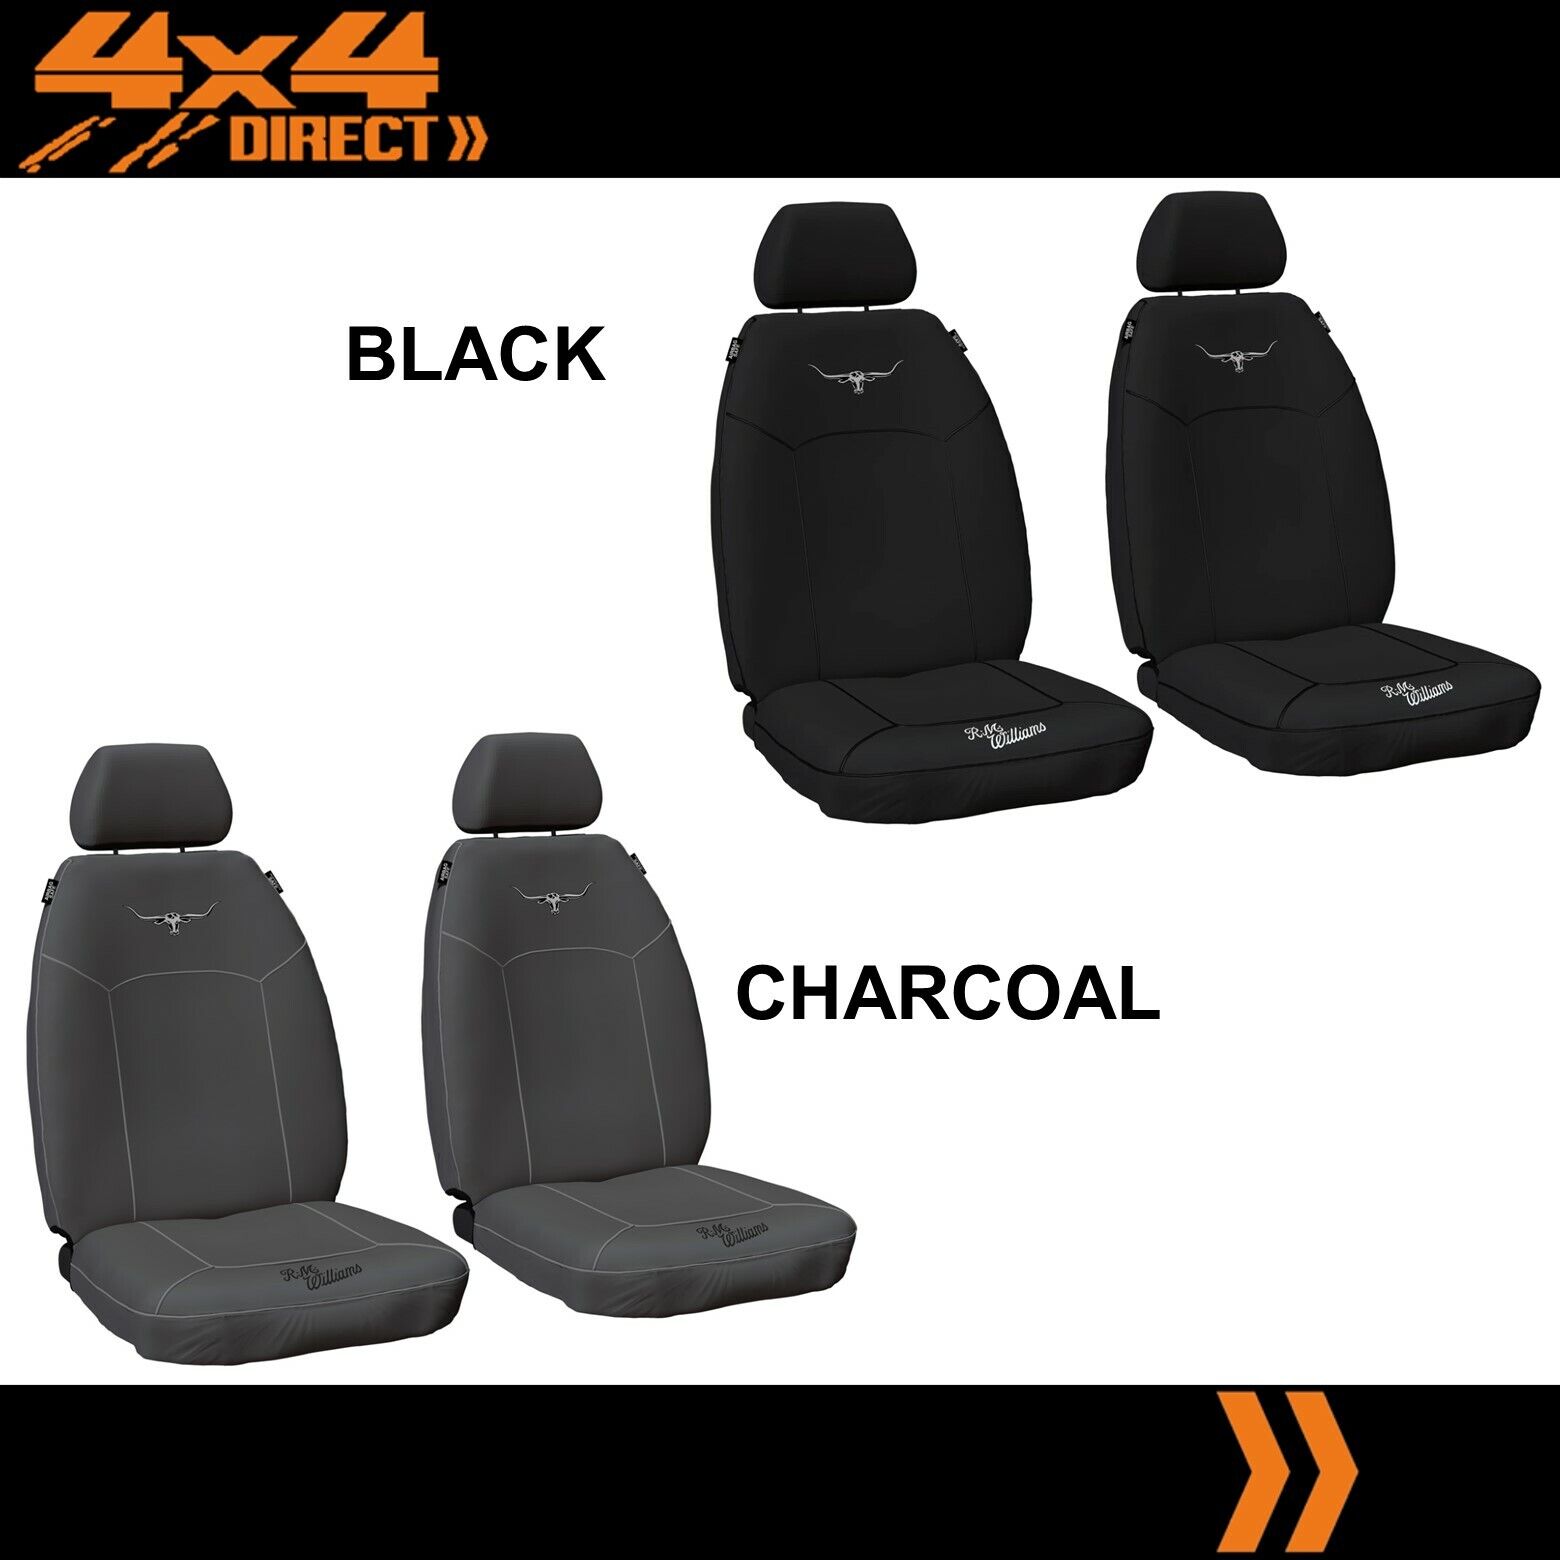 1 ROW CUSTOM Special Large discharge sale price for a limited time RM WILLIAMS CANVAS COVER 04-09 KIA SEAT CERATO FOR